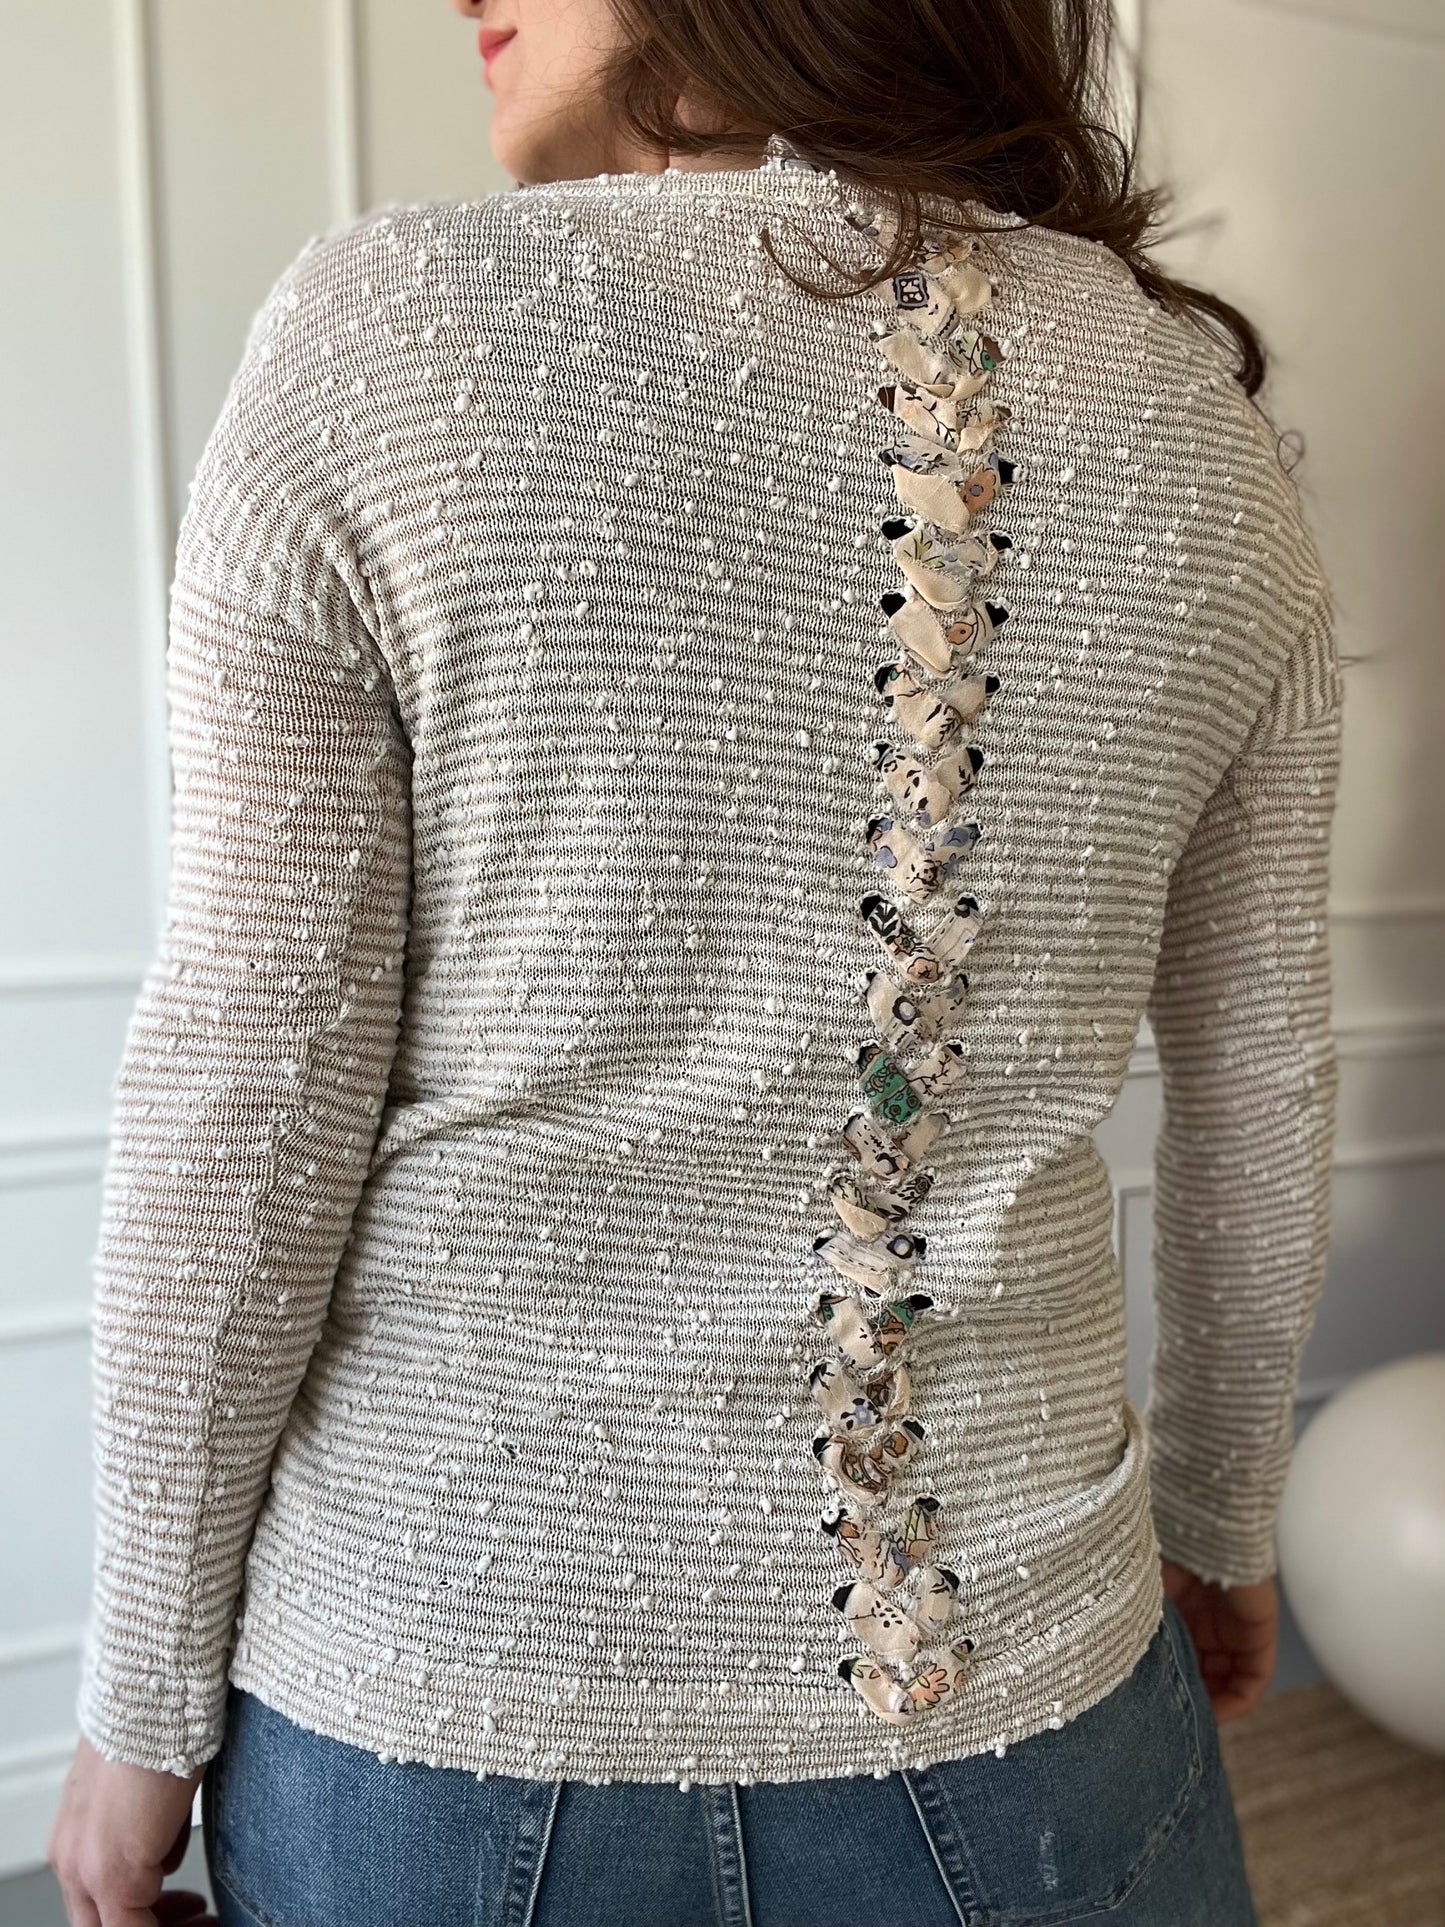 Lace Up Floral Cream Sweater - Size M